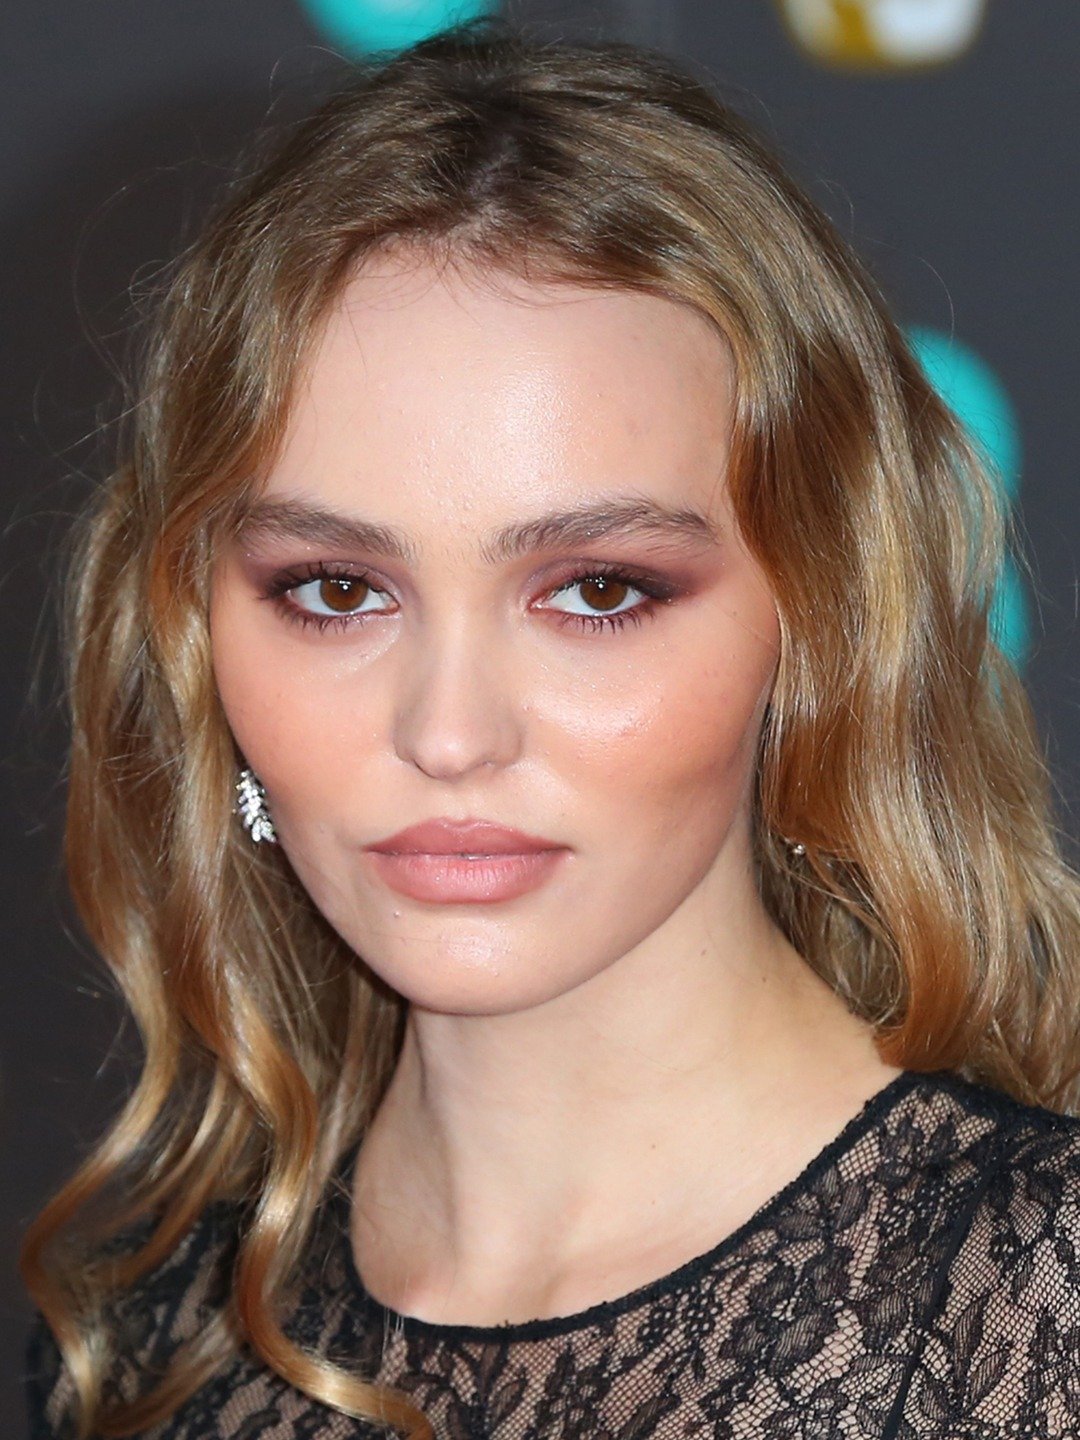 Sort by Popularity - Most Popular Movies and TV Shows With Lily-Rose Depp -  IMDb